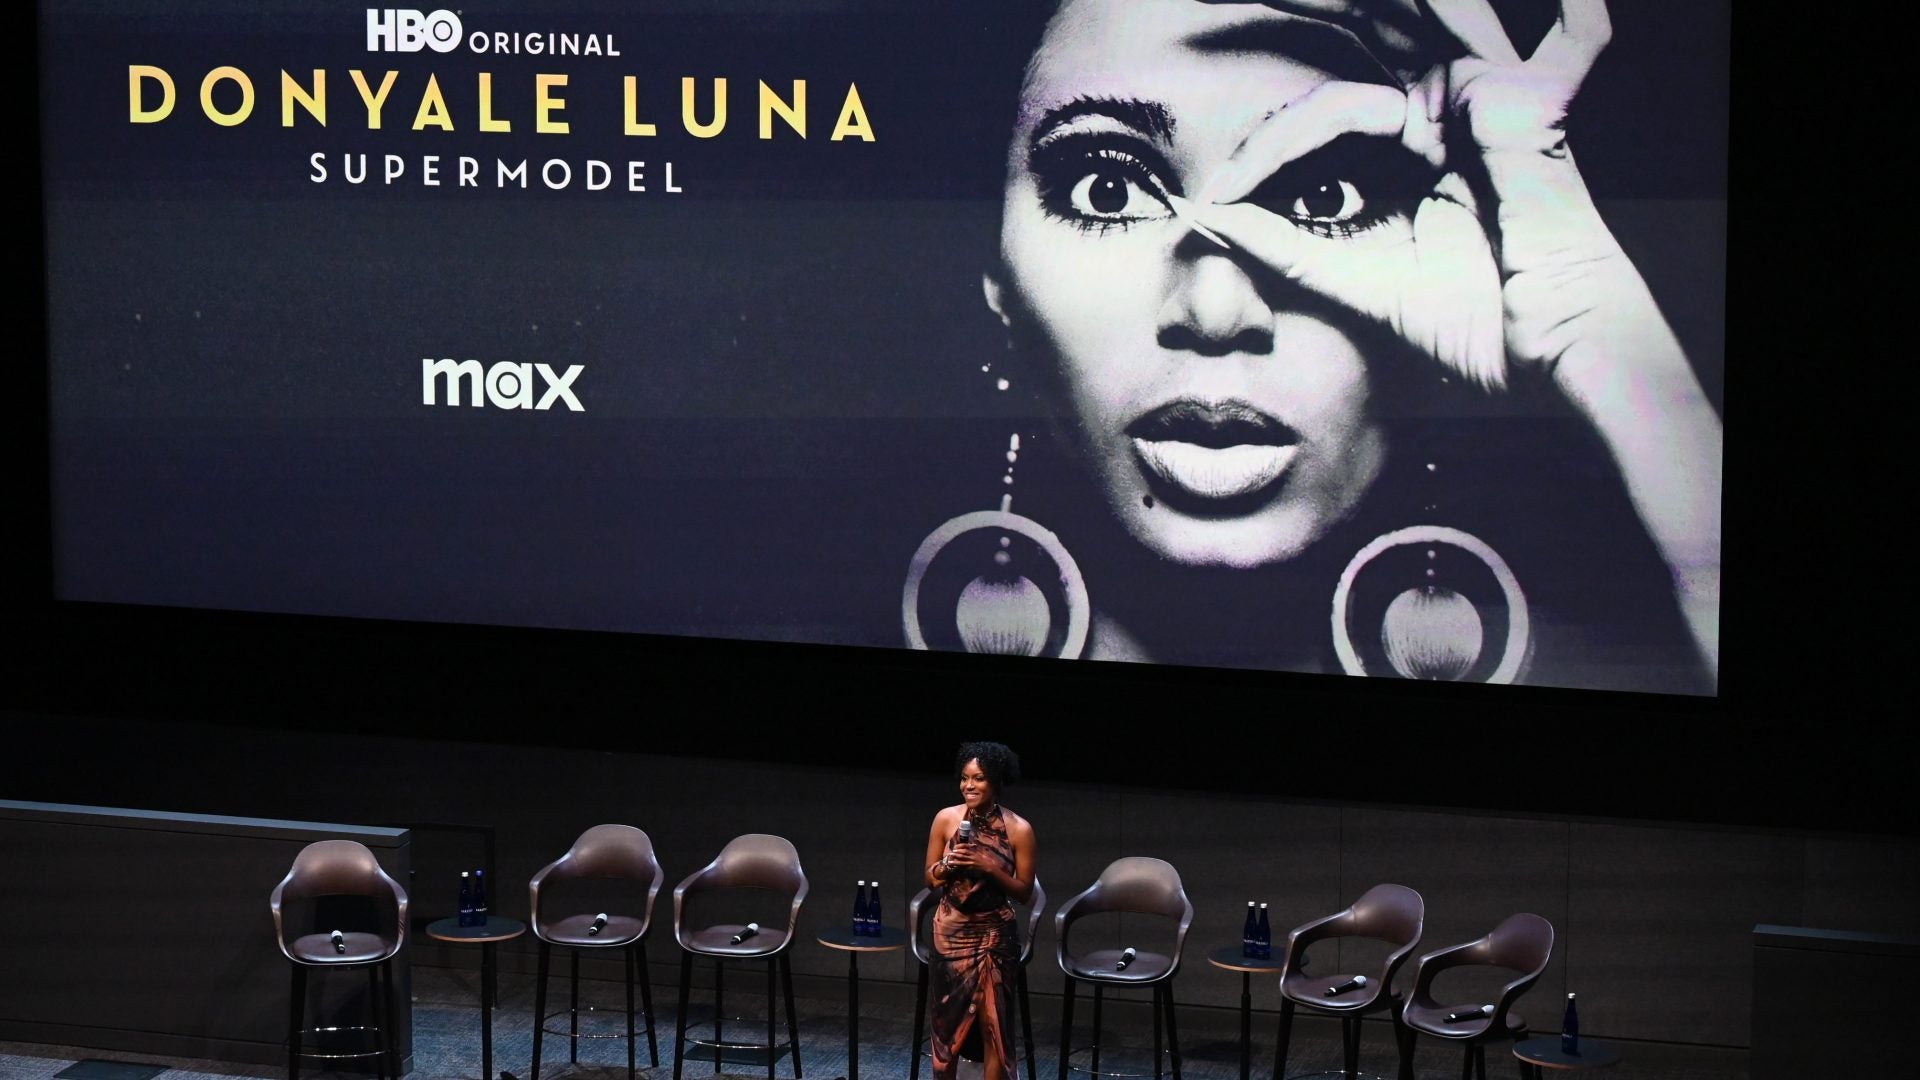 HBO's Latest Documentary Sheds Light On Donyale Luna, The First Black Supermodel